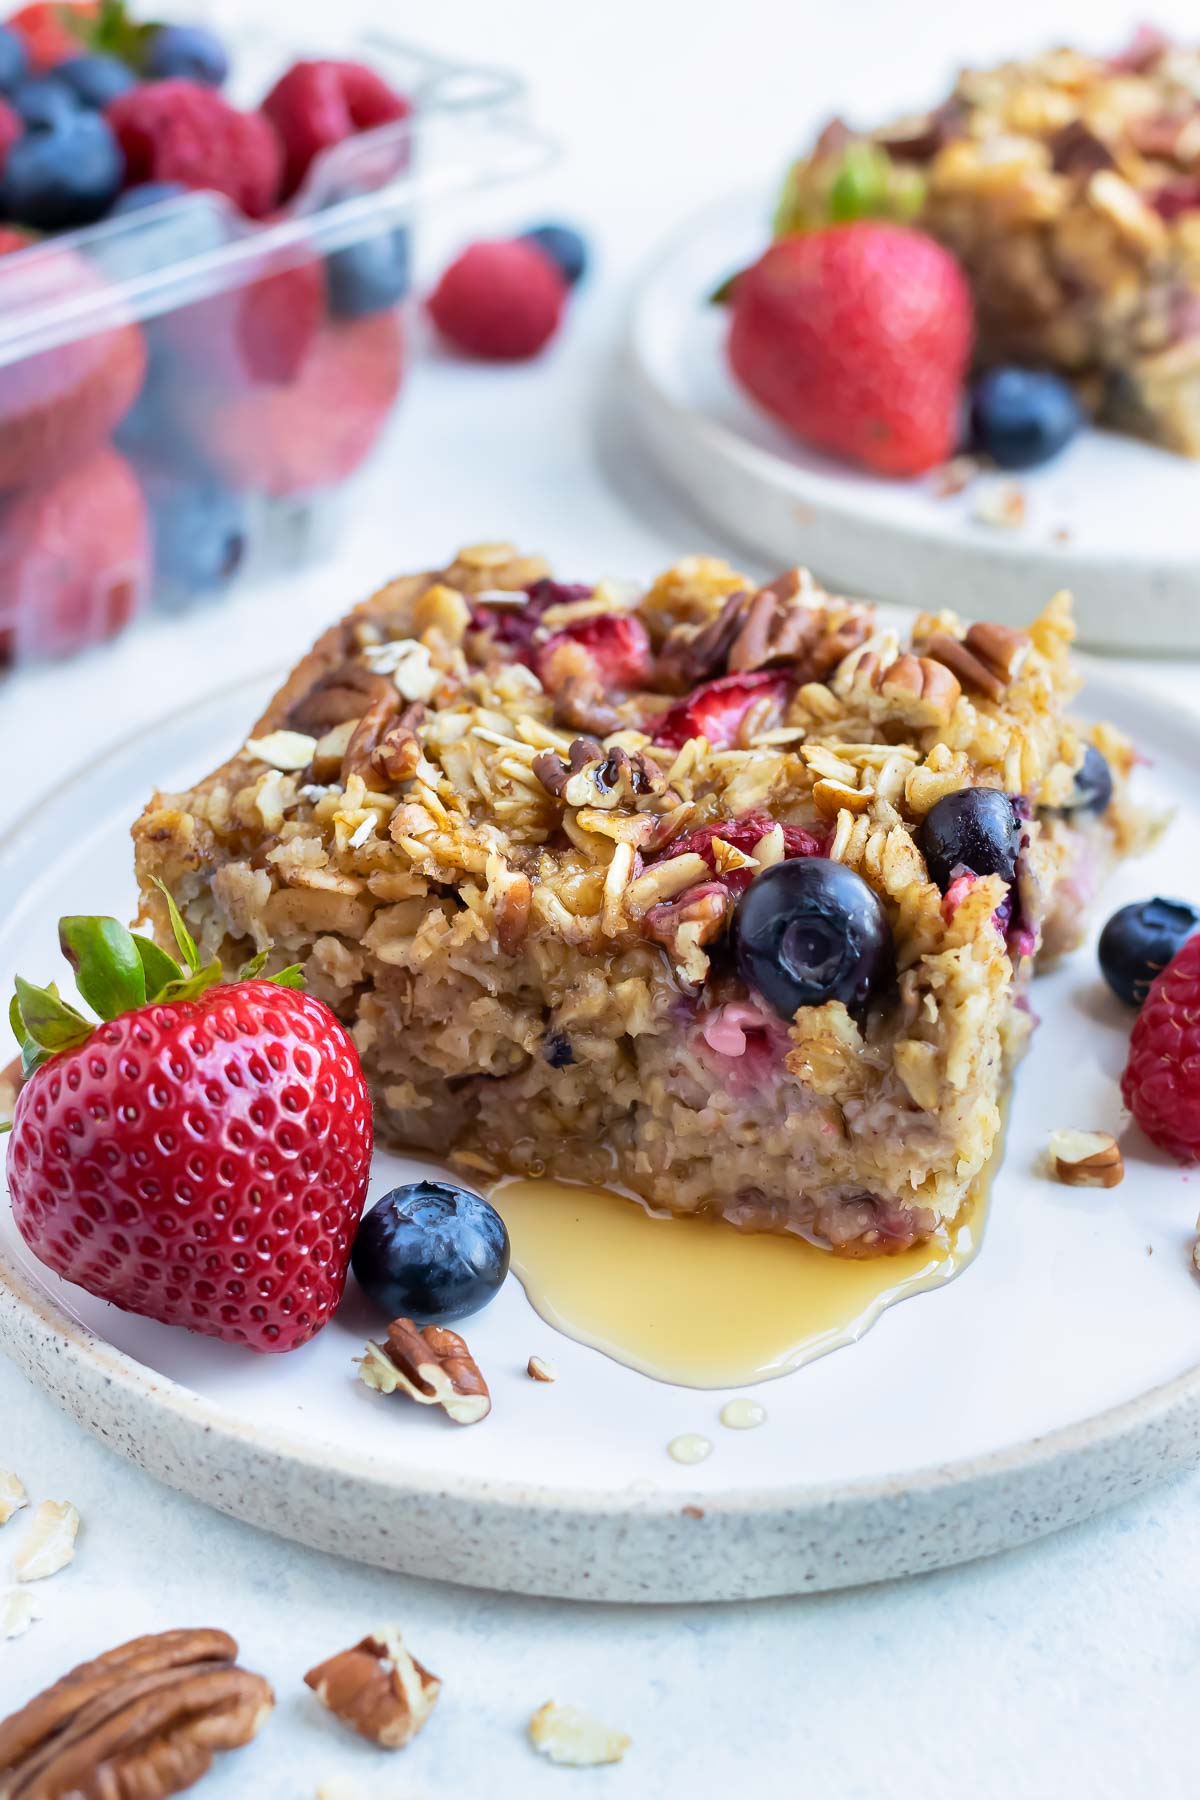 Healthy baked oatmeal is made for an easy grab and go breakfast.